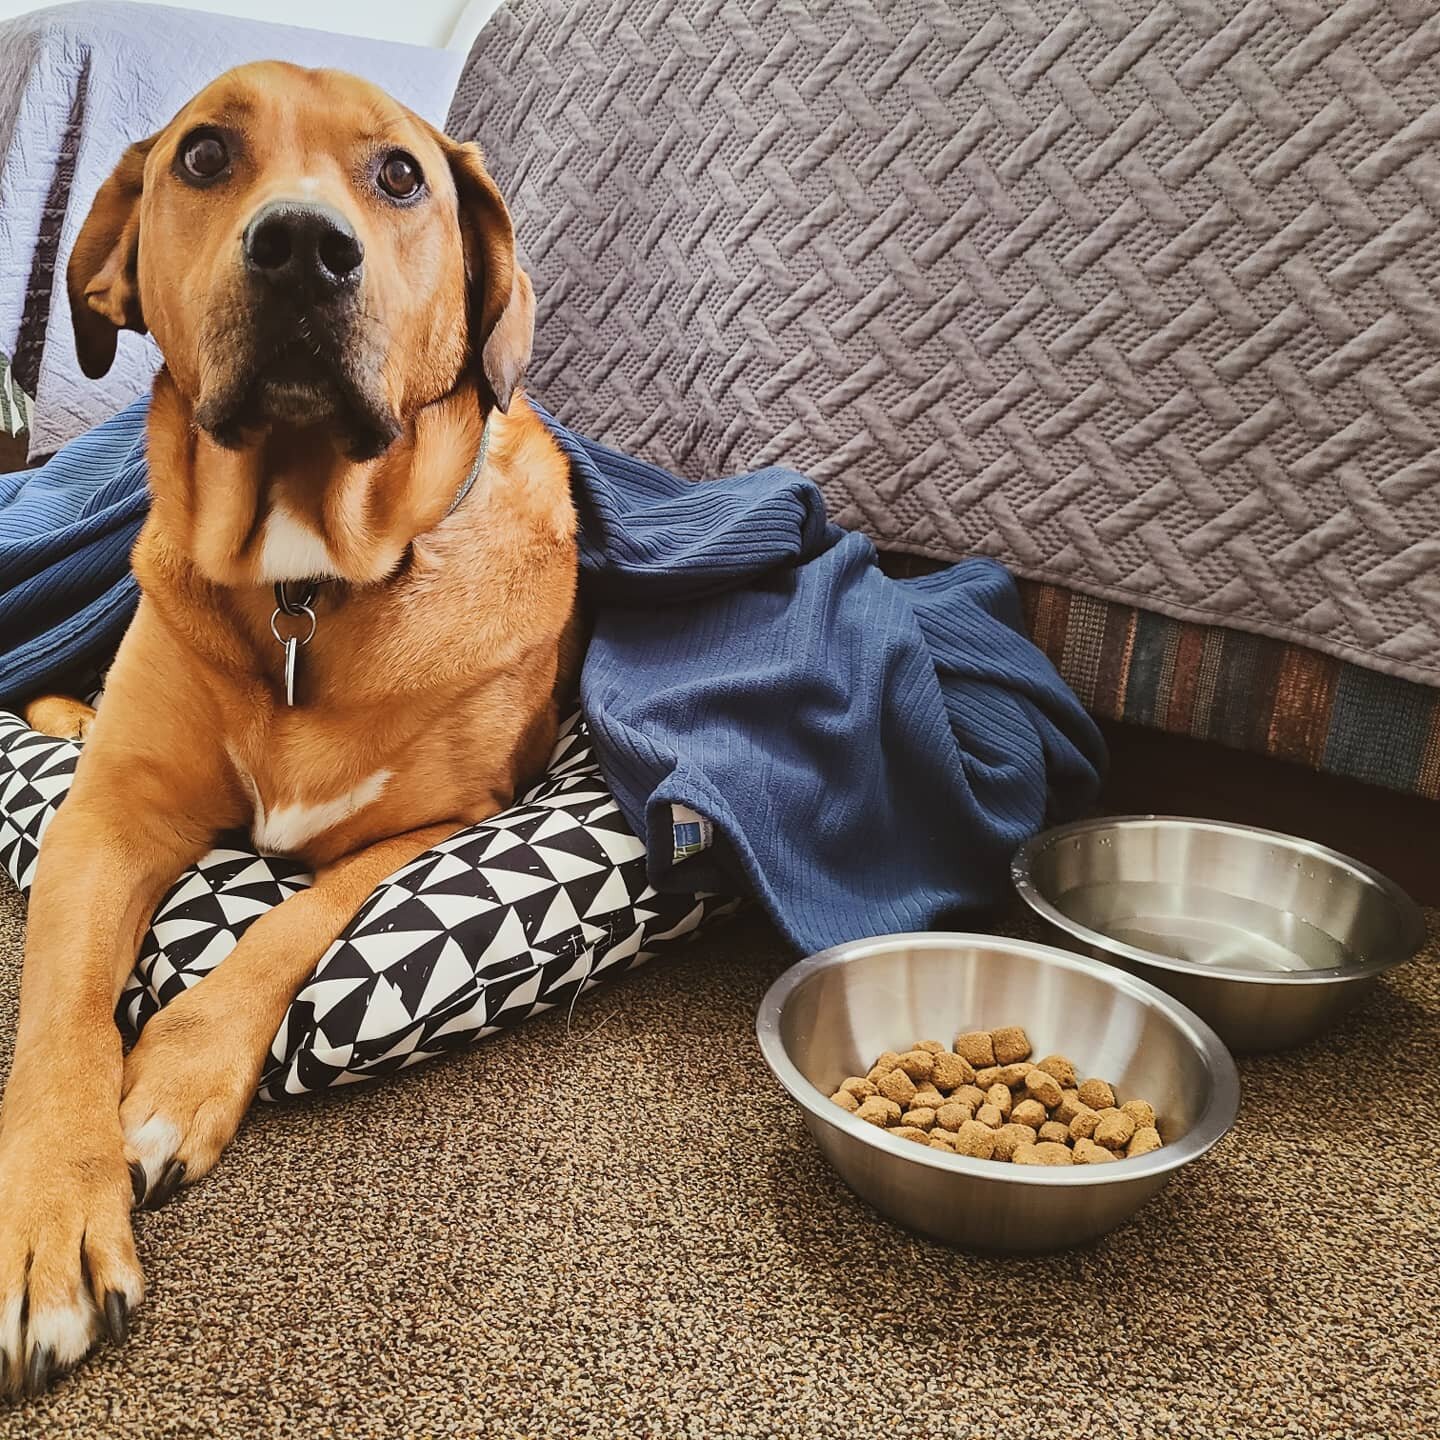 Our doggo accommodations just got a sweet upgrade! 🐶

We are now offering beds, blankets, and bowls for your four-legged family members when they stay with us.
These extras are included in our standard $10/night pet fee - just choose the size of you